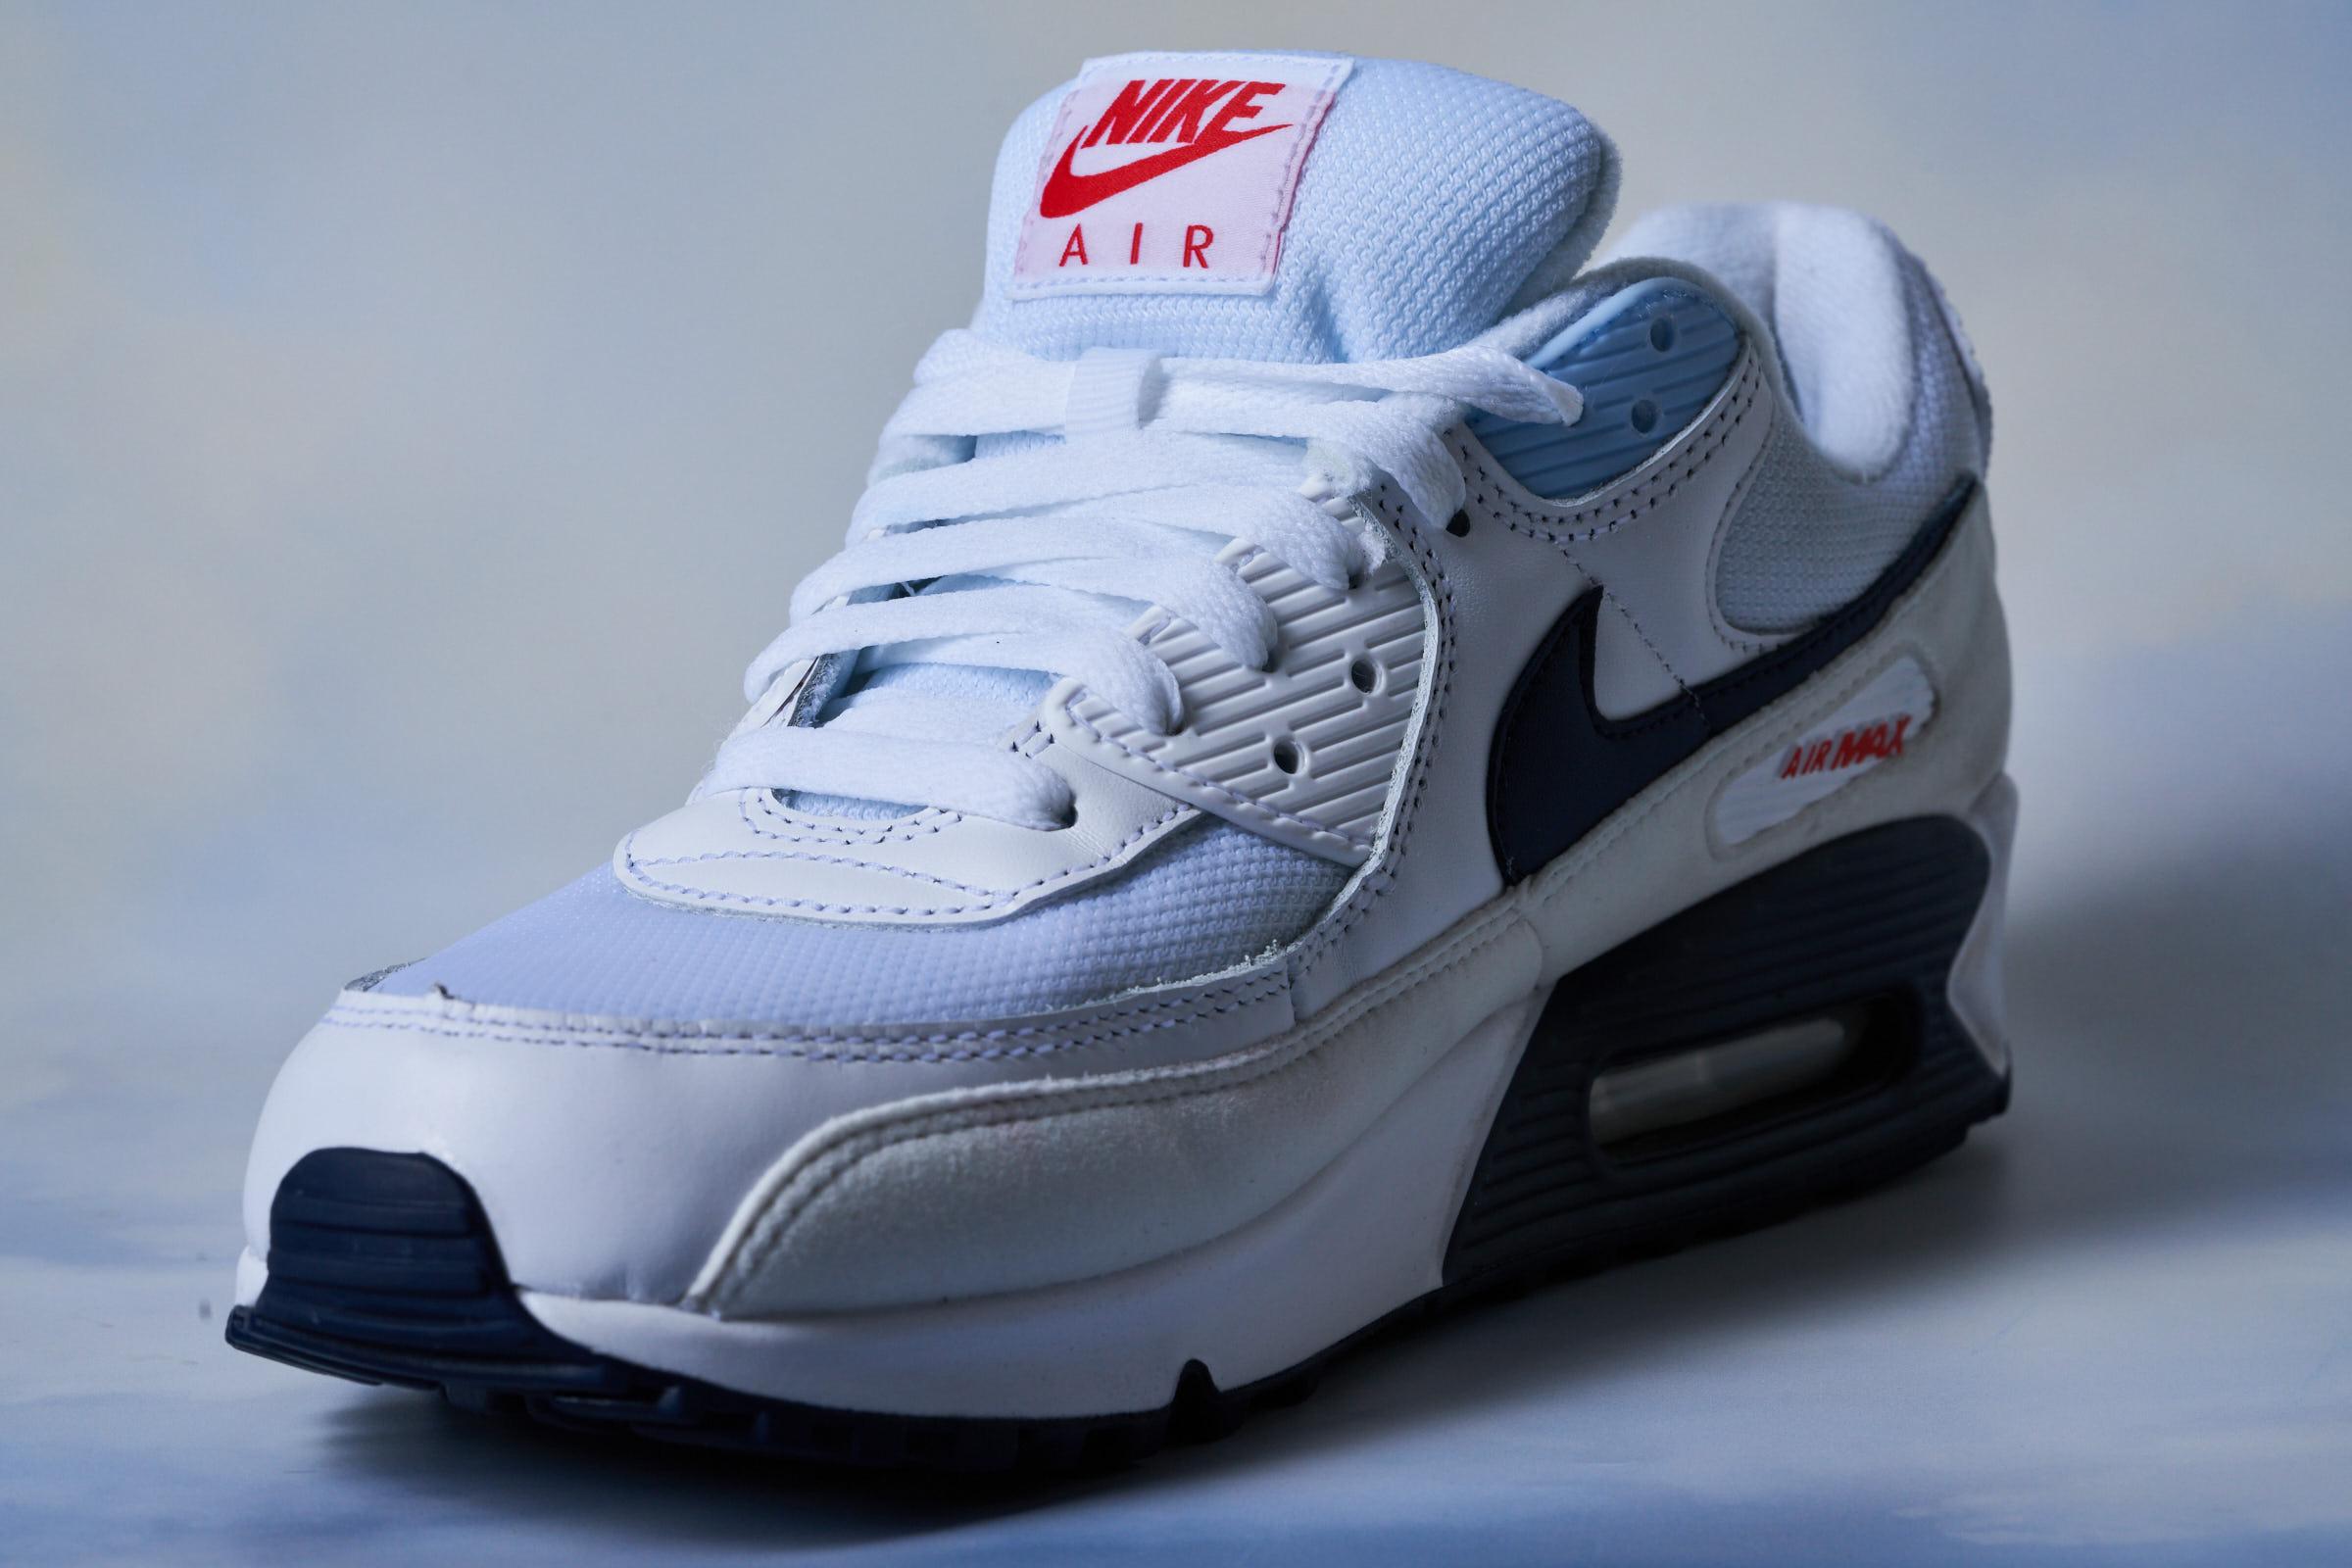 Nike Air Max 90 - Classic White and Grey Sneakers